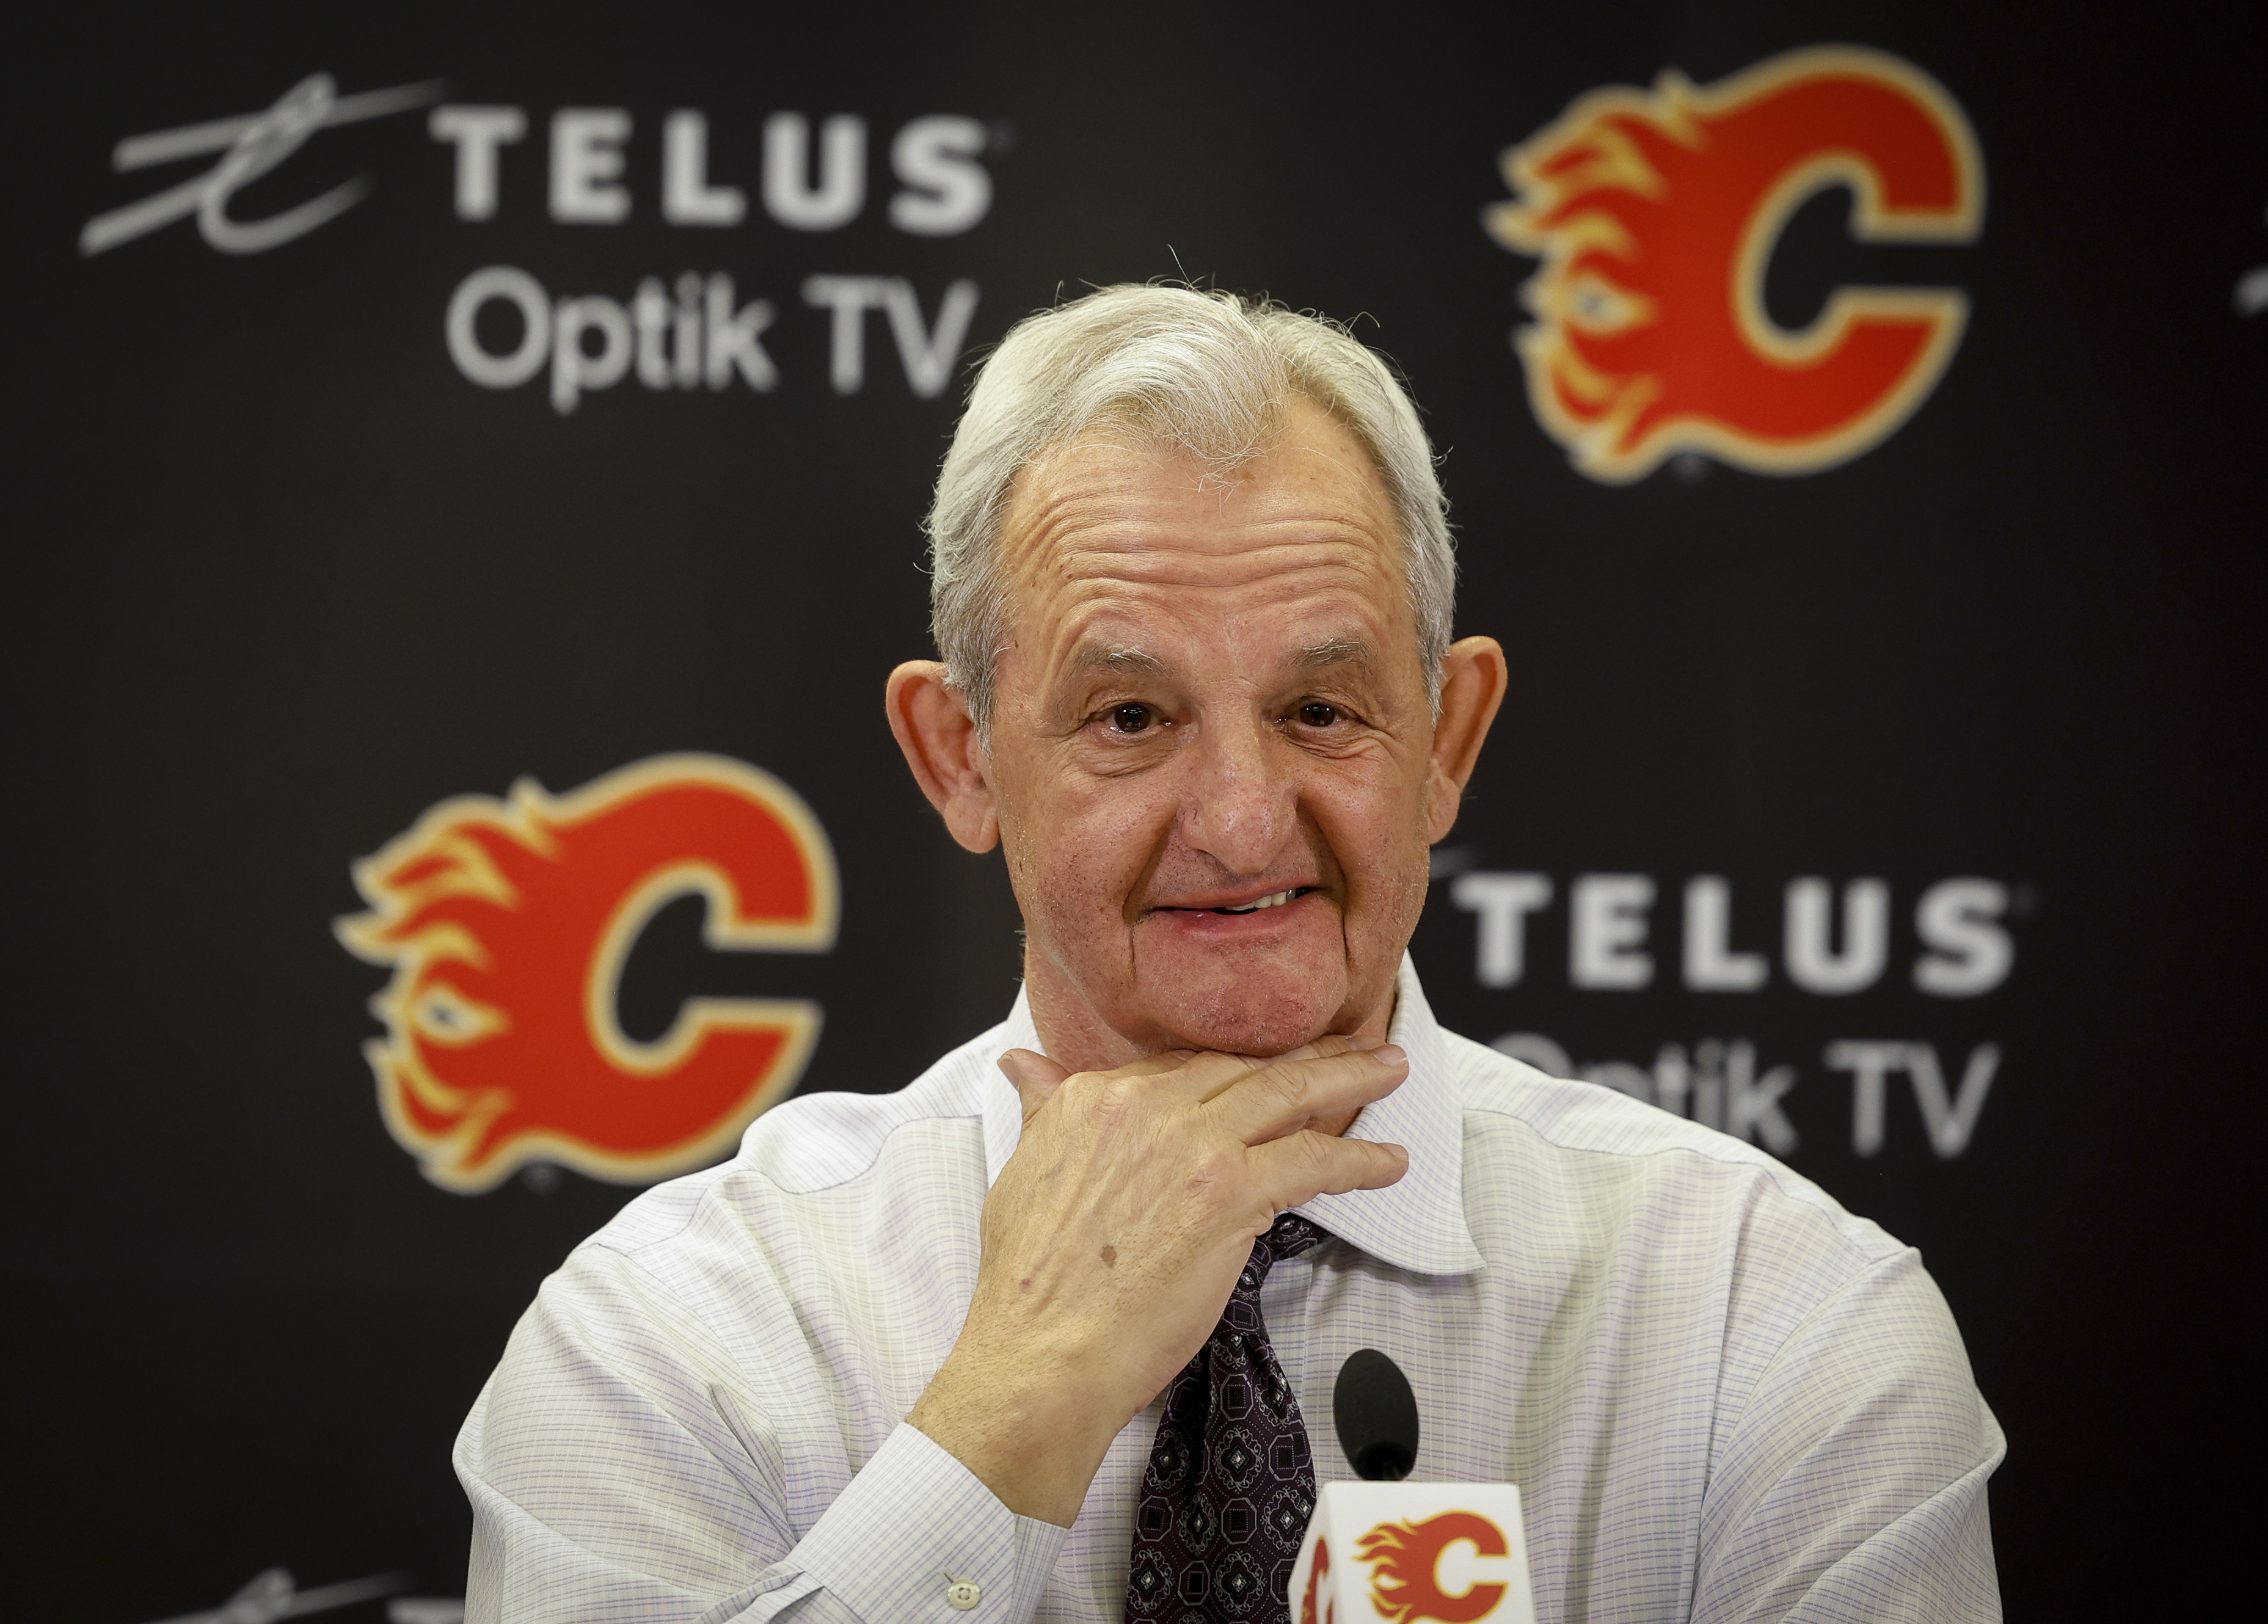 Darryl Sutter, head coach of the Calgary Flames, attends the post-game press conference after the 3-1 over the San Jose Sharks at the Scotiabank Saddledome in Calgary, Alberta, Canada, April 12, 2023. /CFP